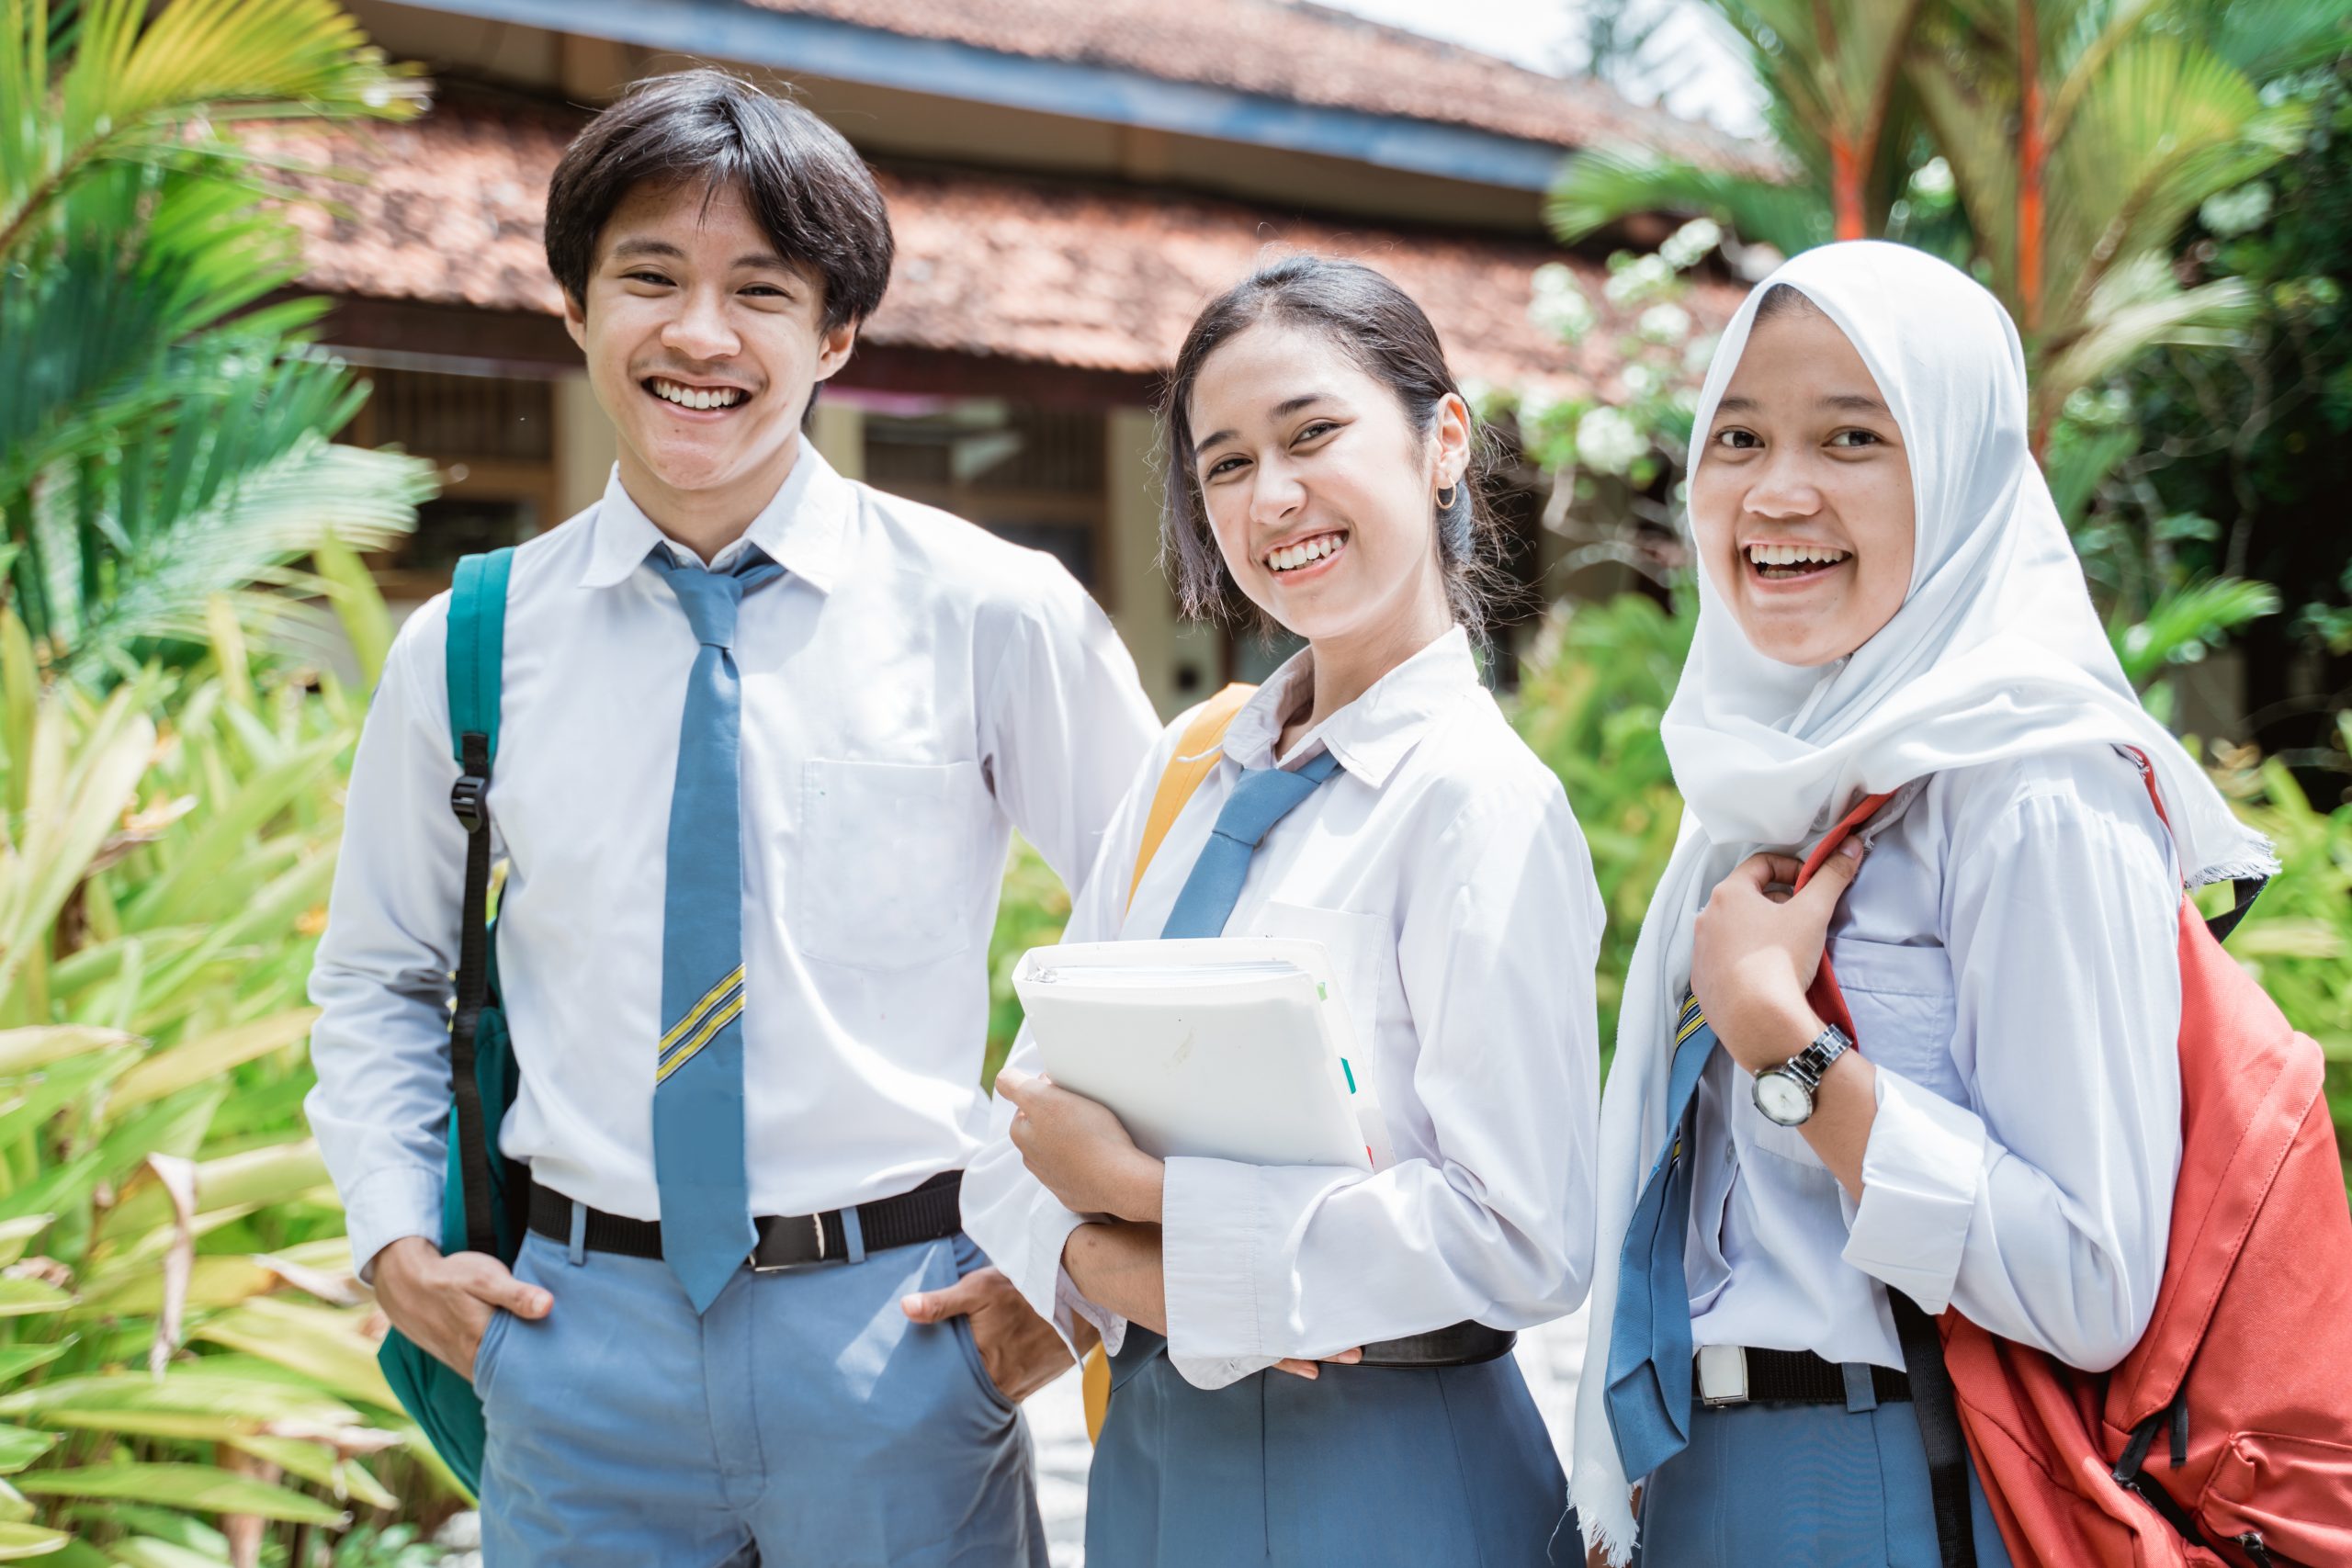 Three students in Indonesian high school uniform, each carrying a backpack, smiling